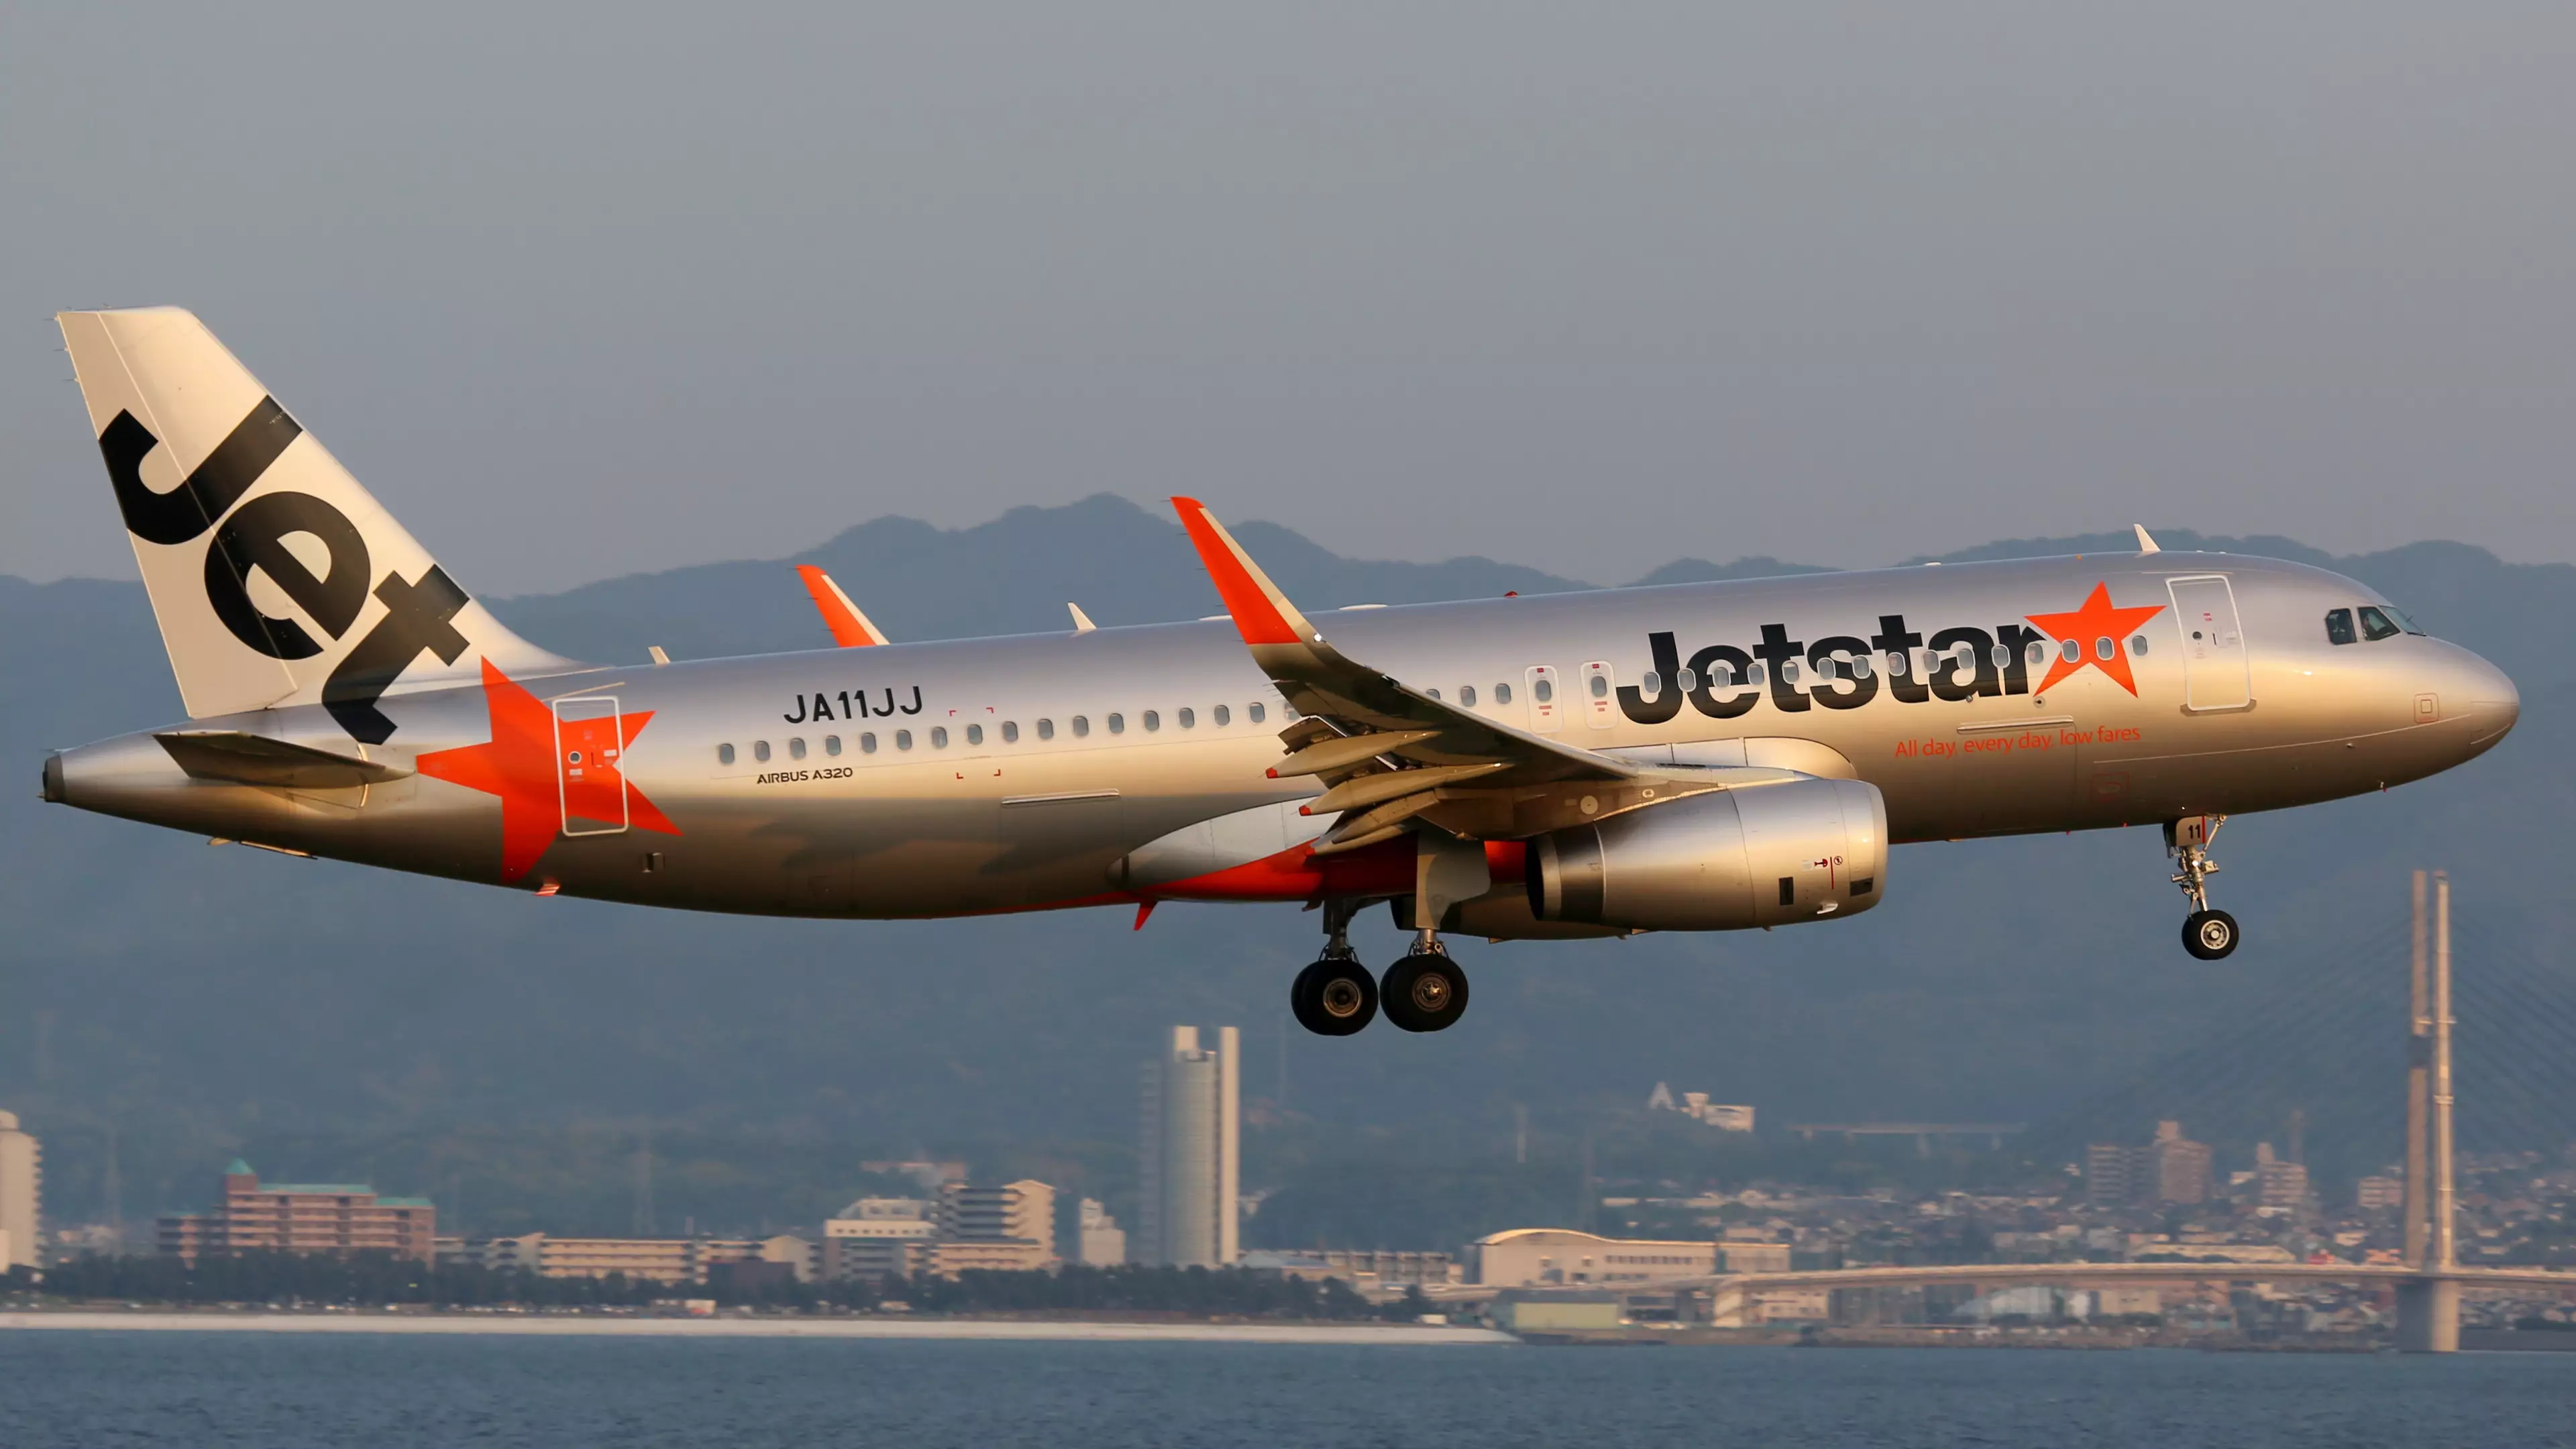 Jetstar Drops Huge Sale With Flights To New Zealand Going For $175 One-Way